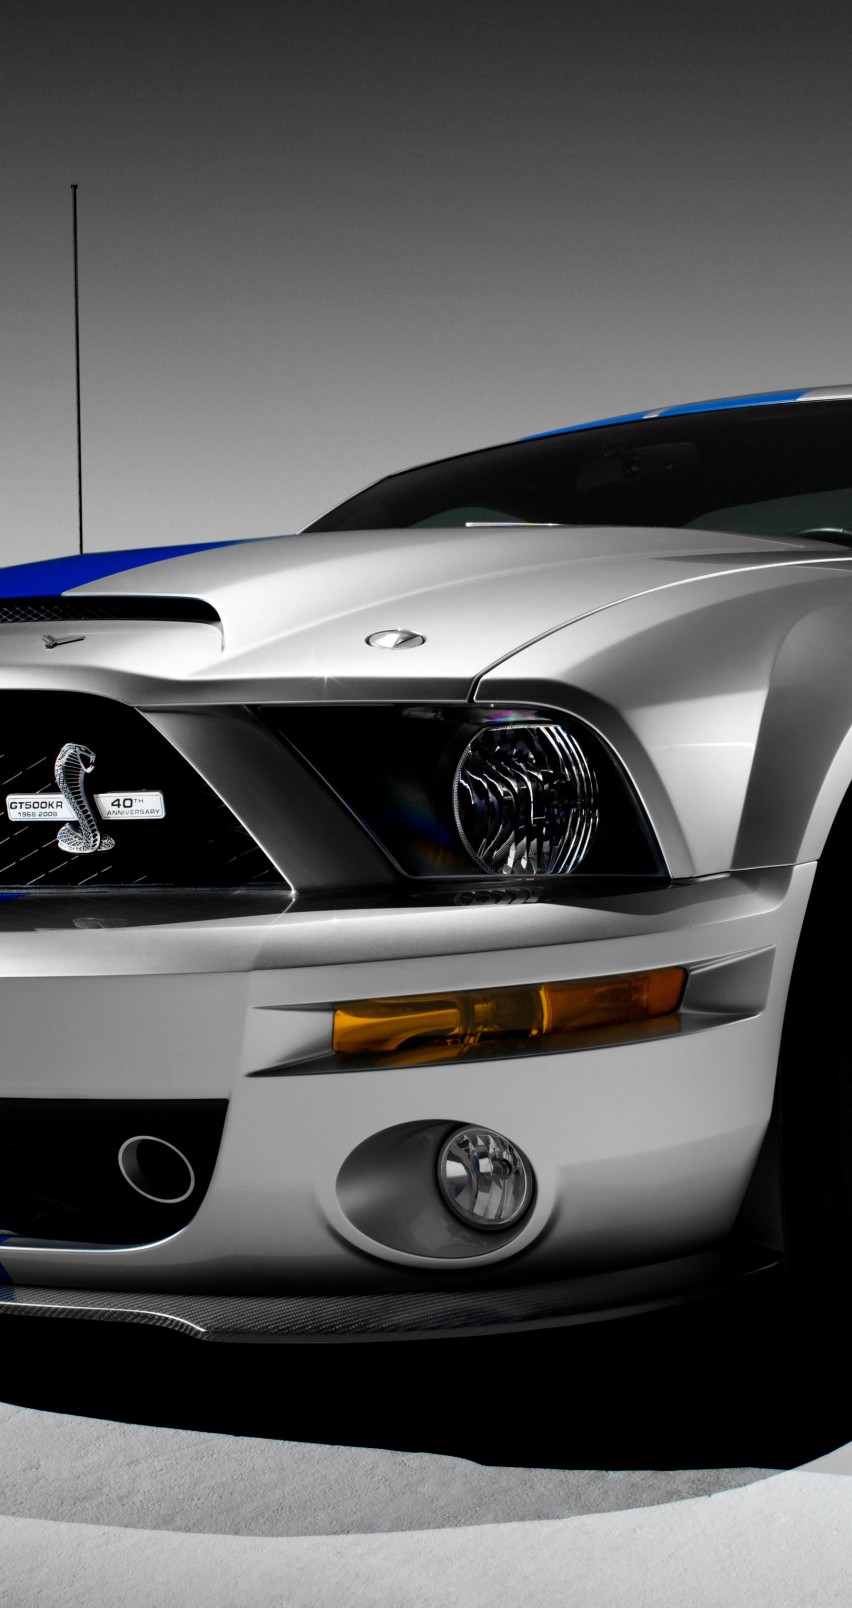 Shelby Mustang GT500KR Wallpaper for Apple iPhone 6 / 6s